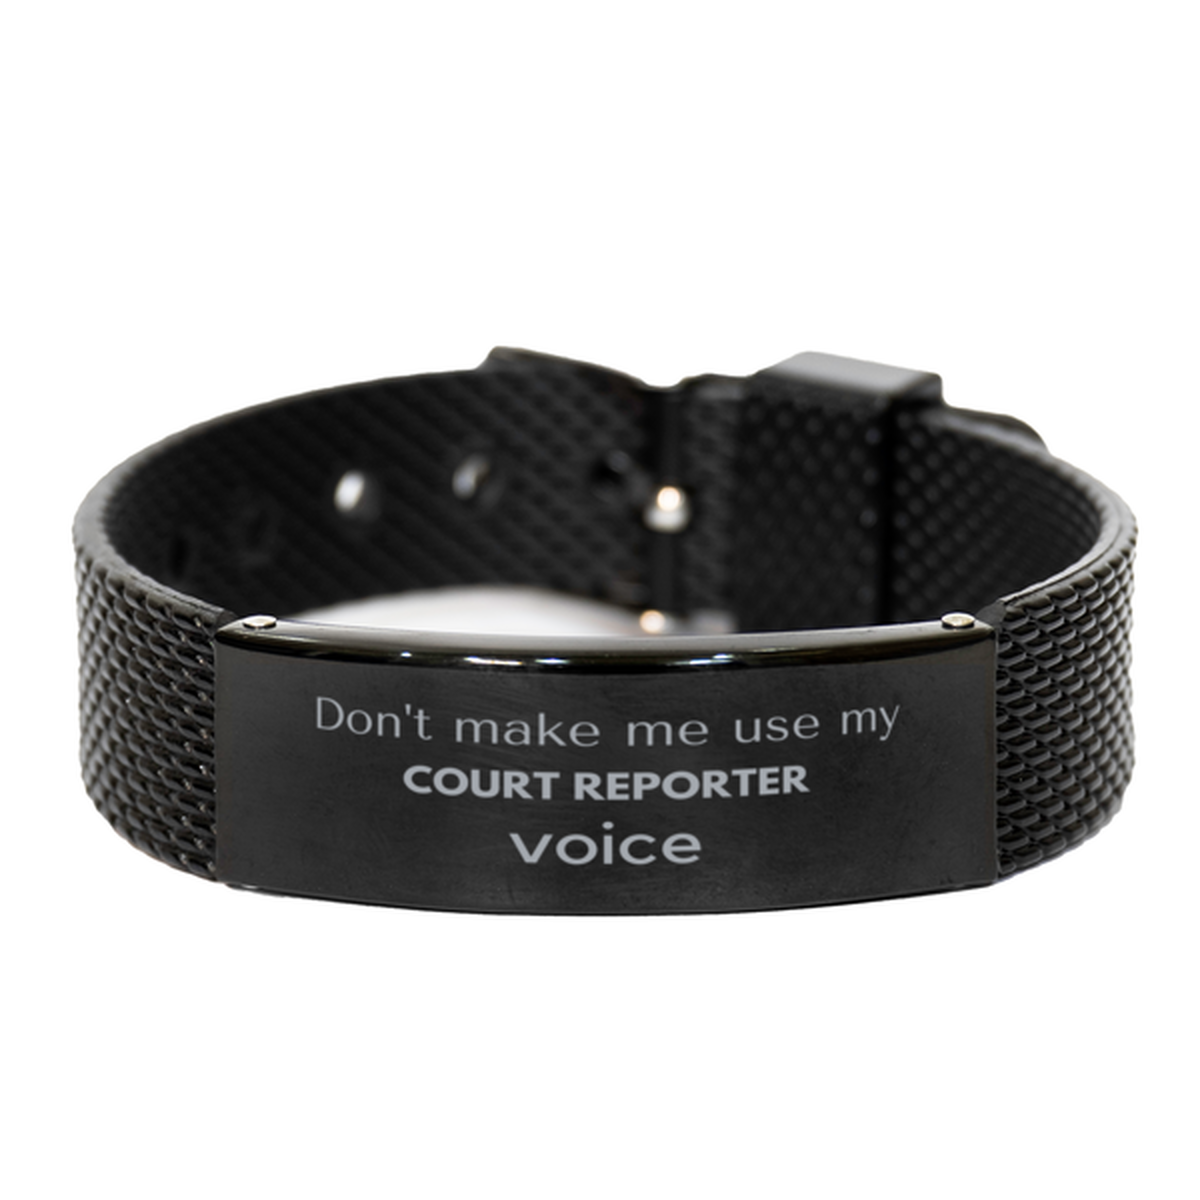 Don't make me use my Court Reporter voice, Sarcasm Court Reporter Gifts, Christmas Court Reporter Black Shark Mesh Bracelet Birthday Unique Gifts For Court Reporter Coworkers, Men, Women, Colleague, Friends